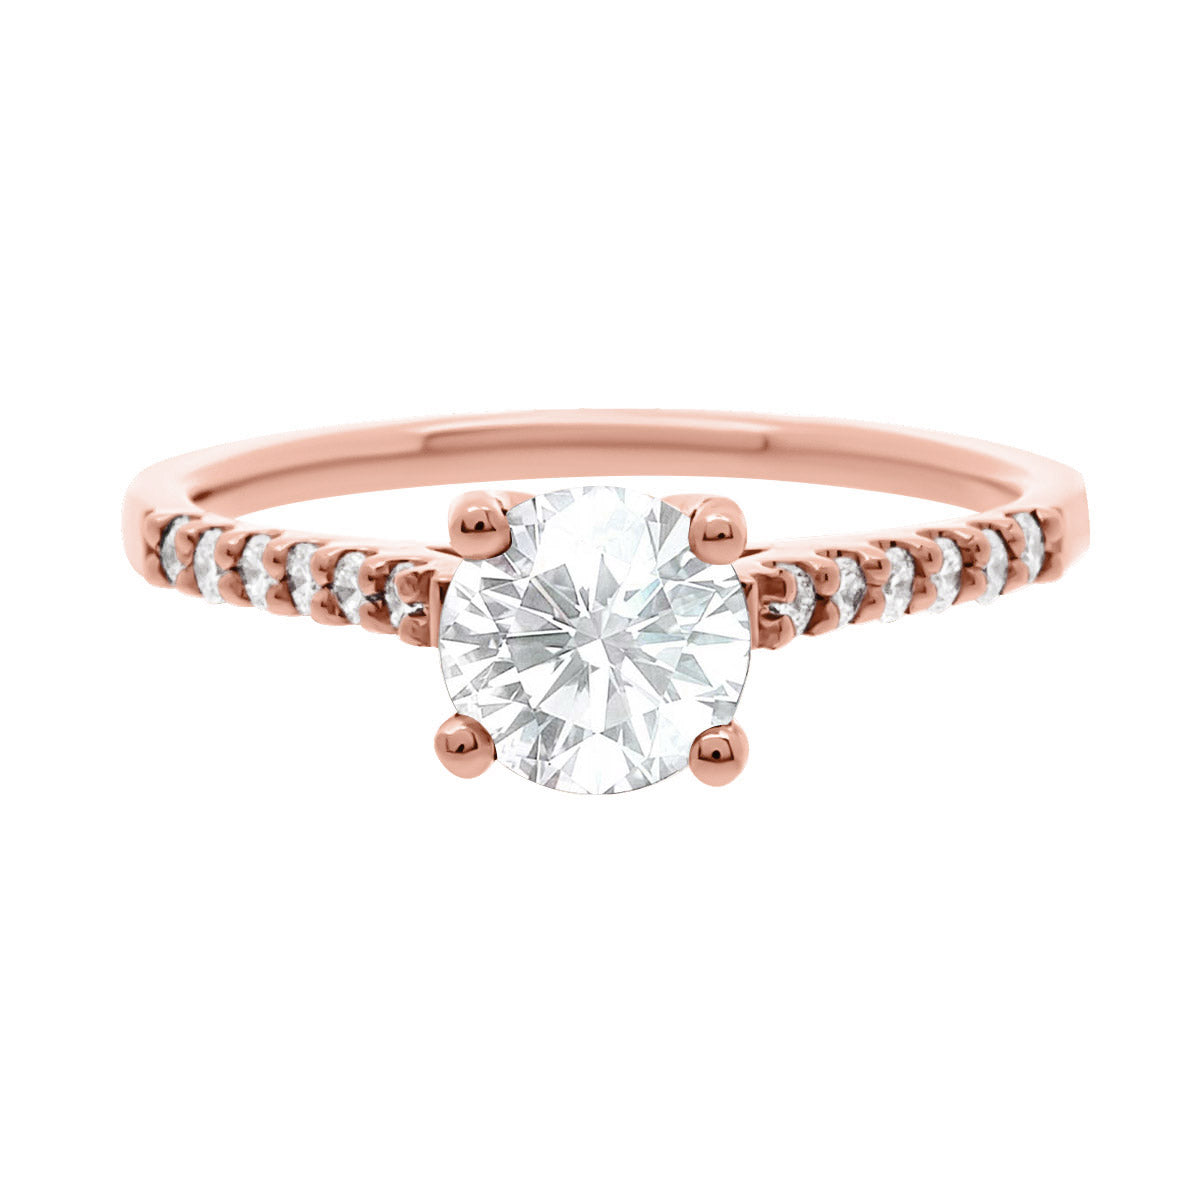 Solitaire With Diamond Shoulders ENGAGEMENT RING IN ROSE GOLD